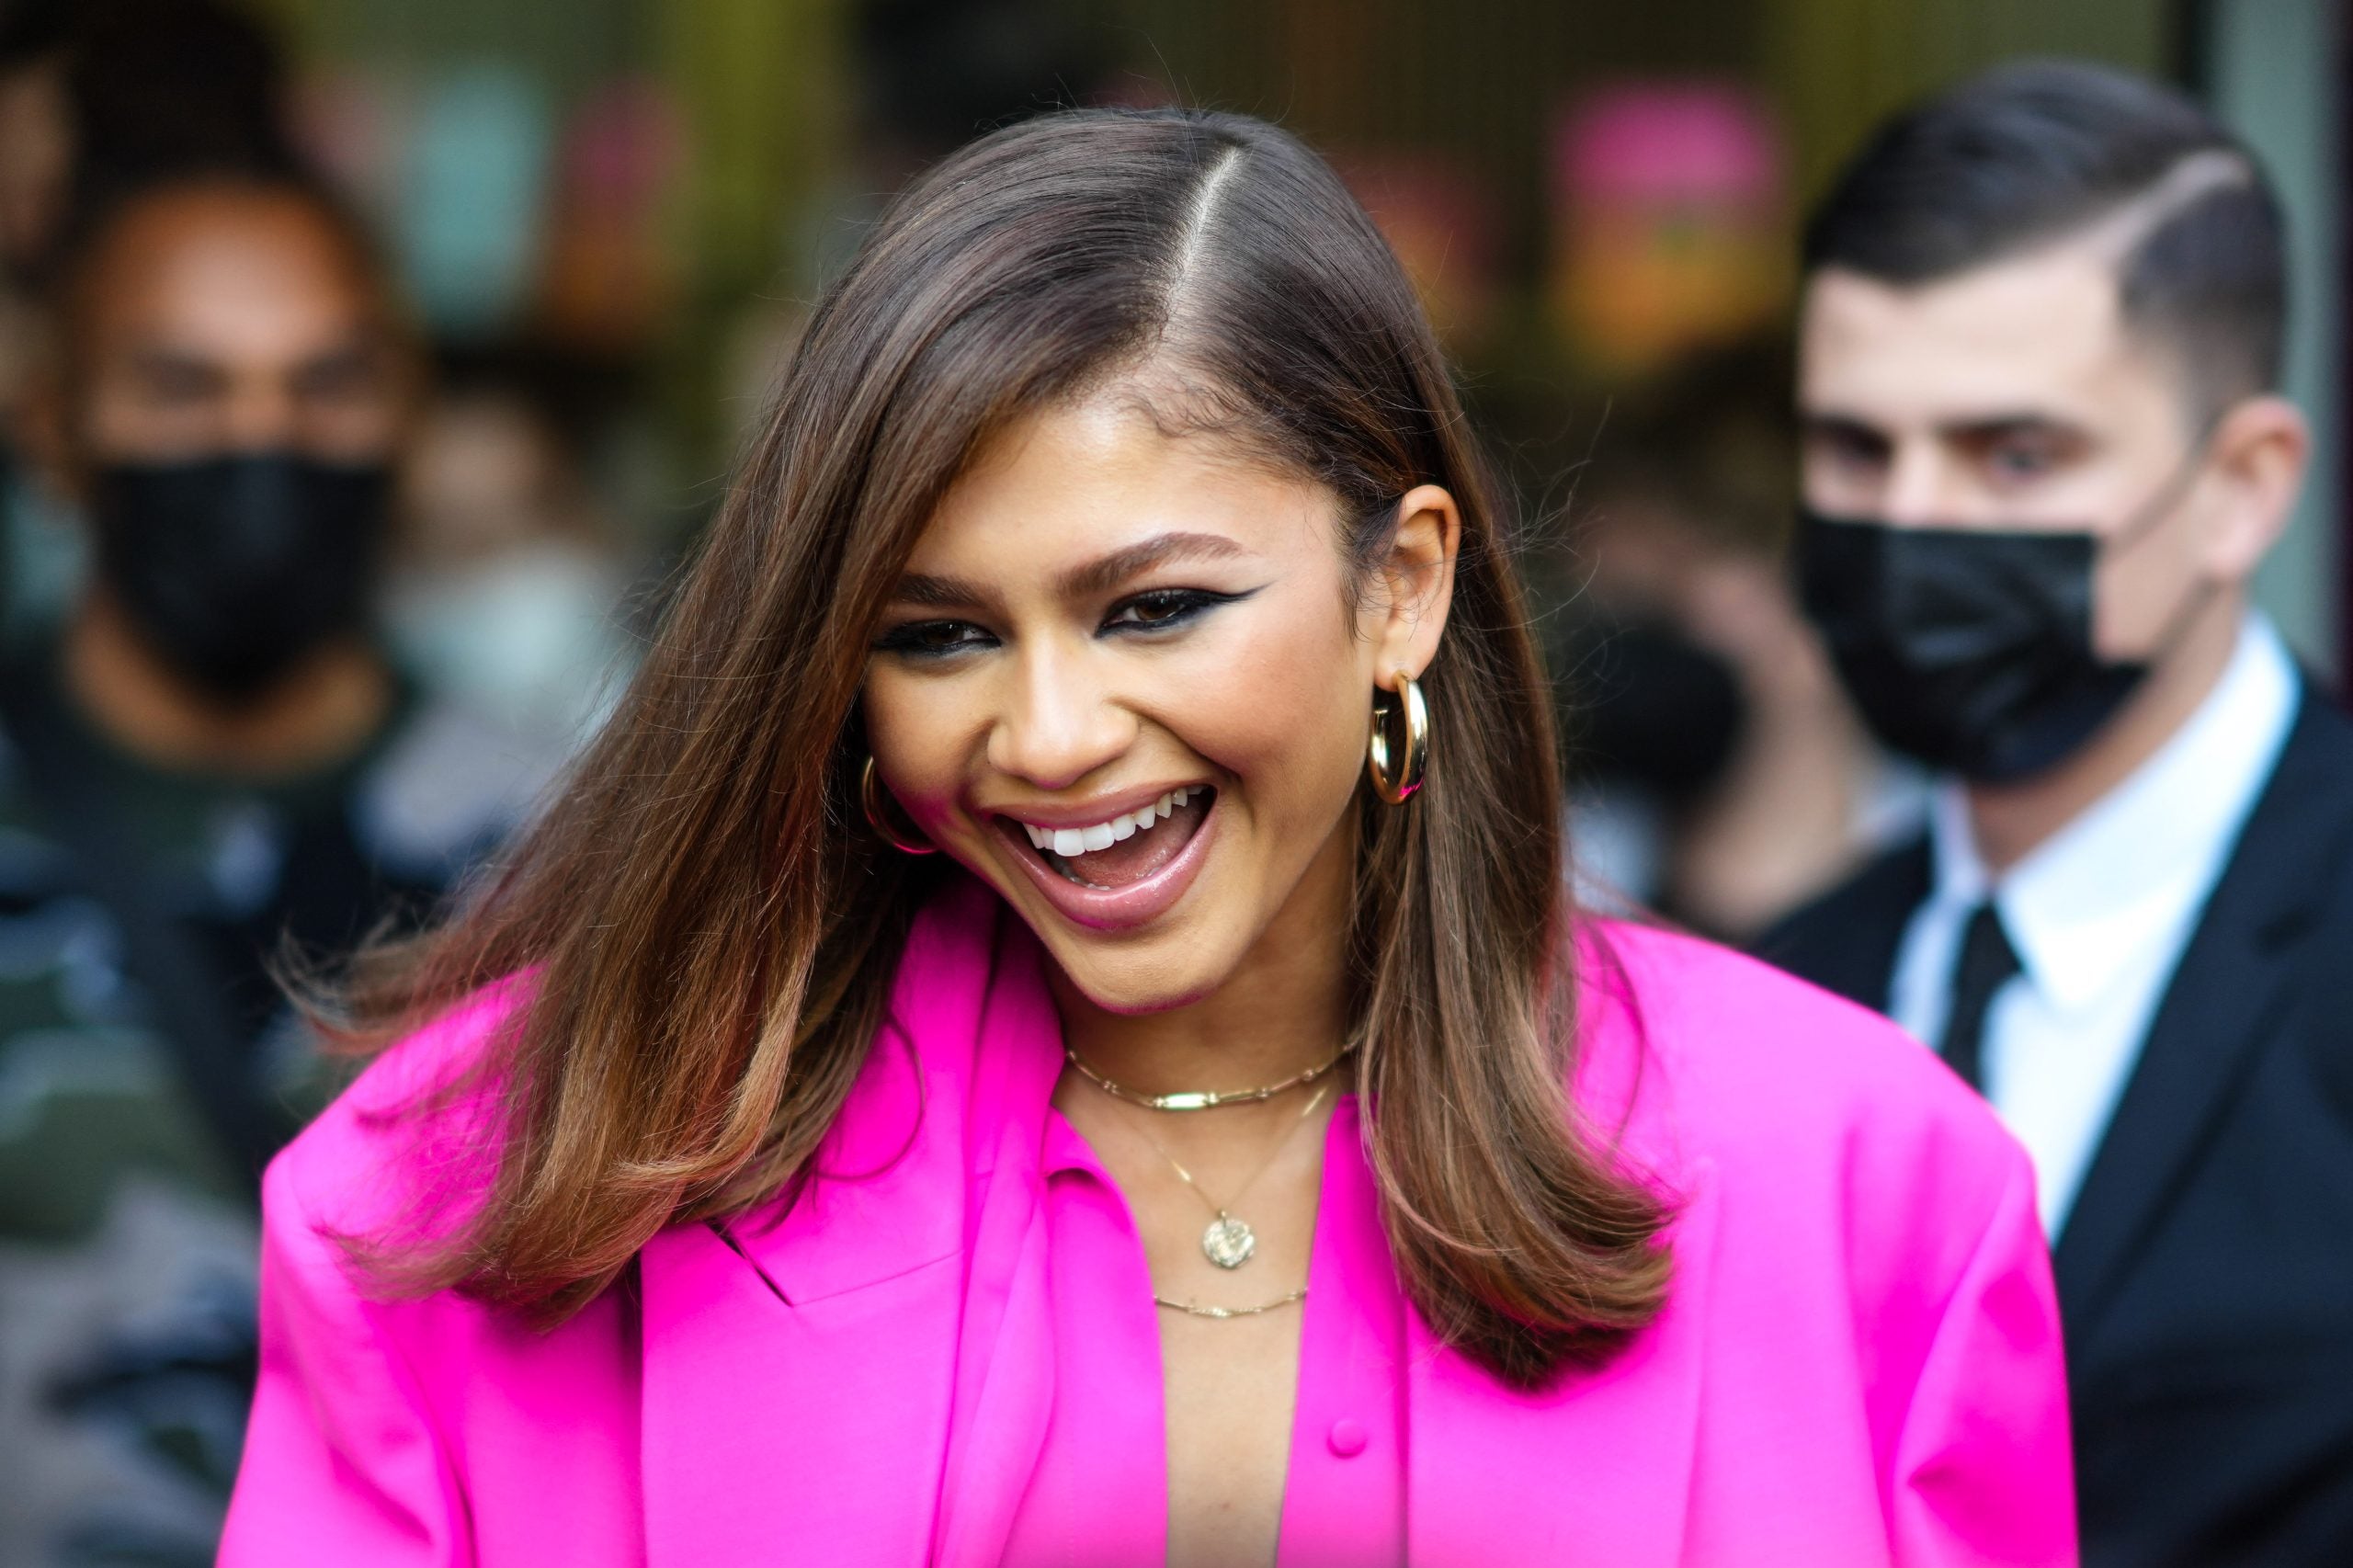 Zendaya Promises To ‘Never’ Cook Again After Kitchen Mishap Lands Her In The Hospital